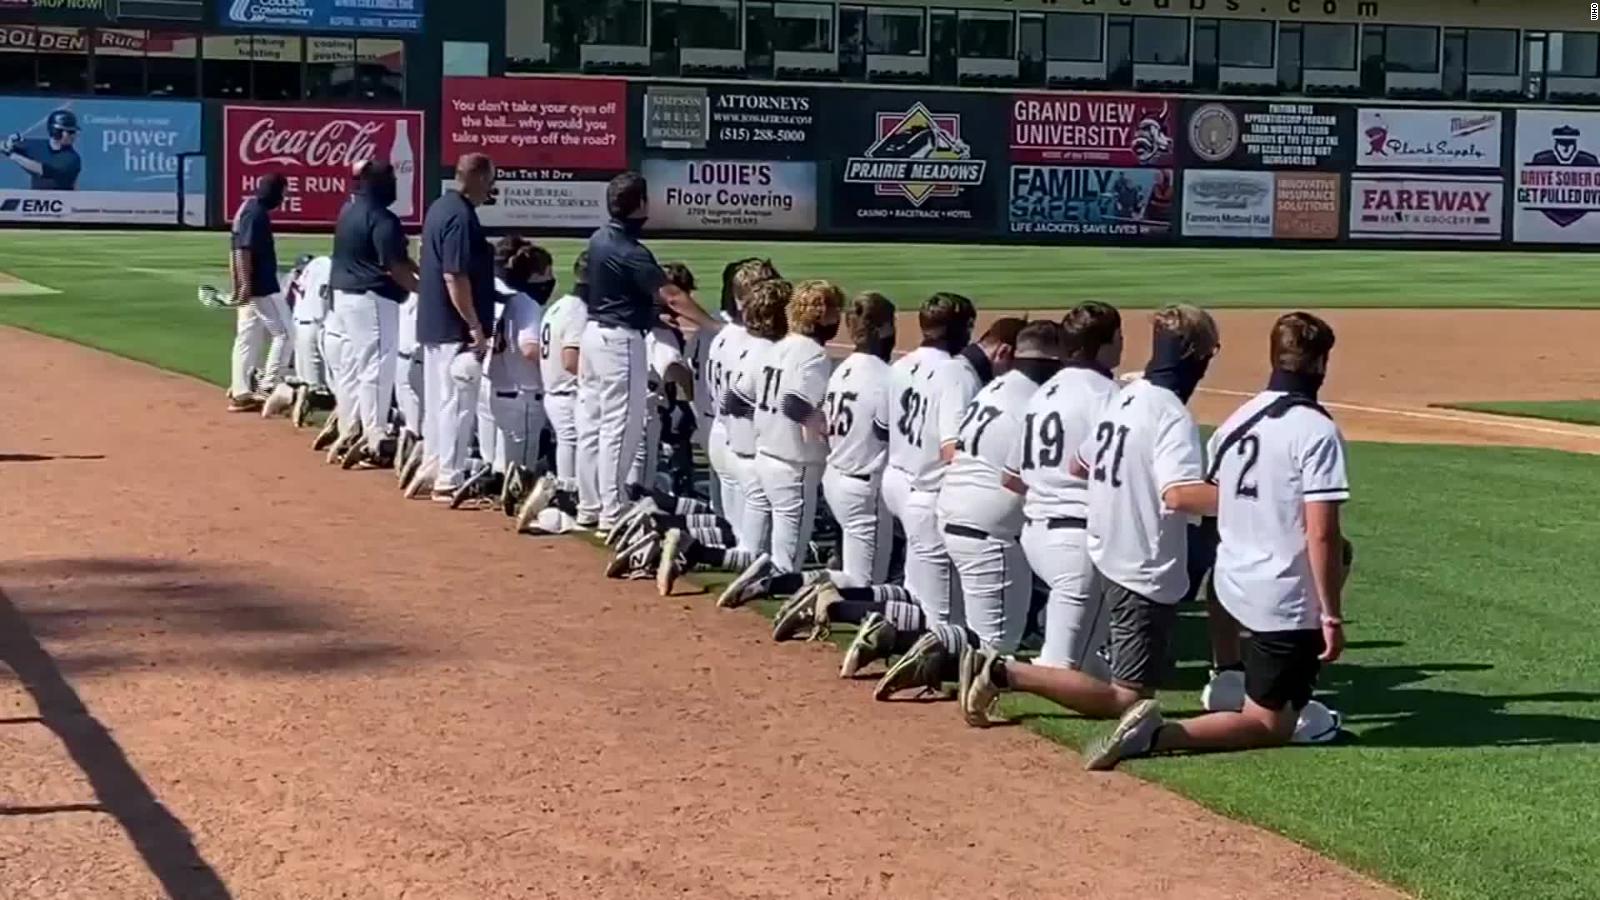 An entire high school baseball team knelt during the National Anthem to